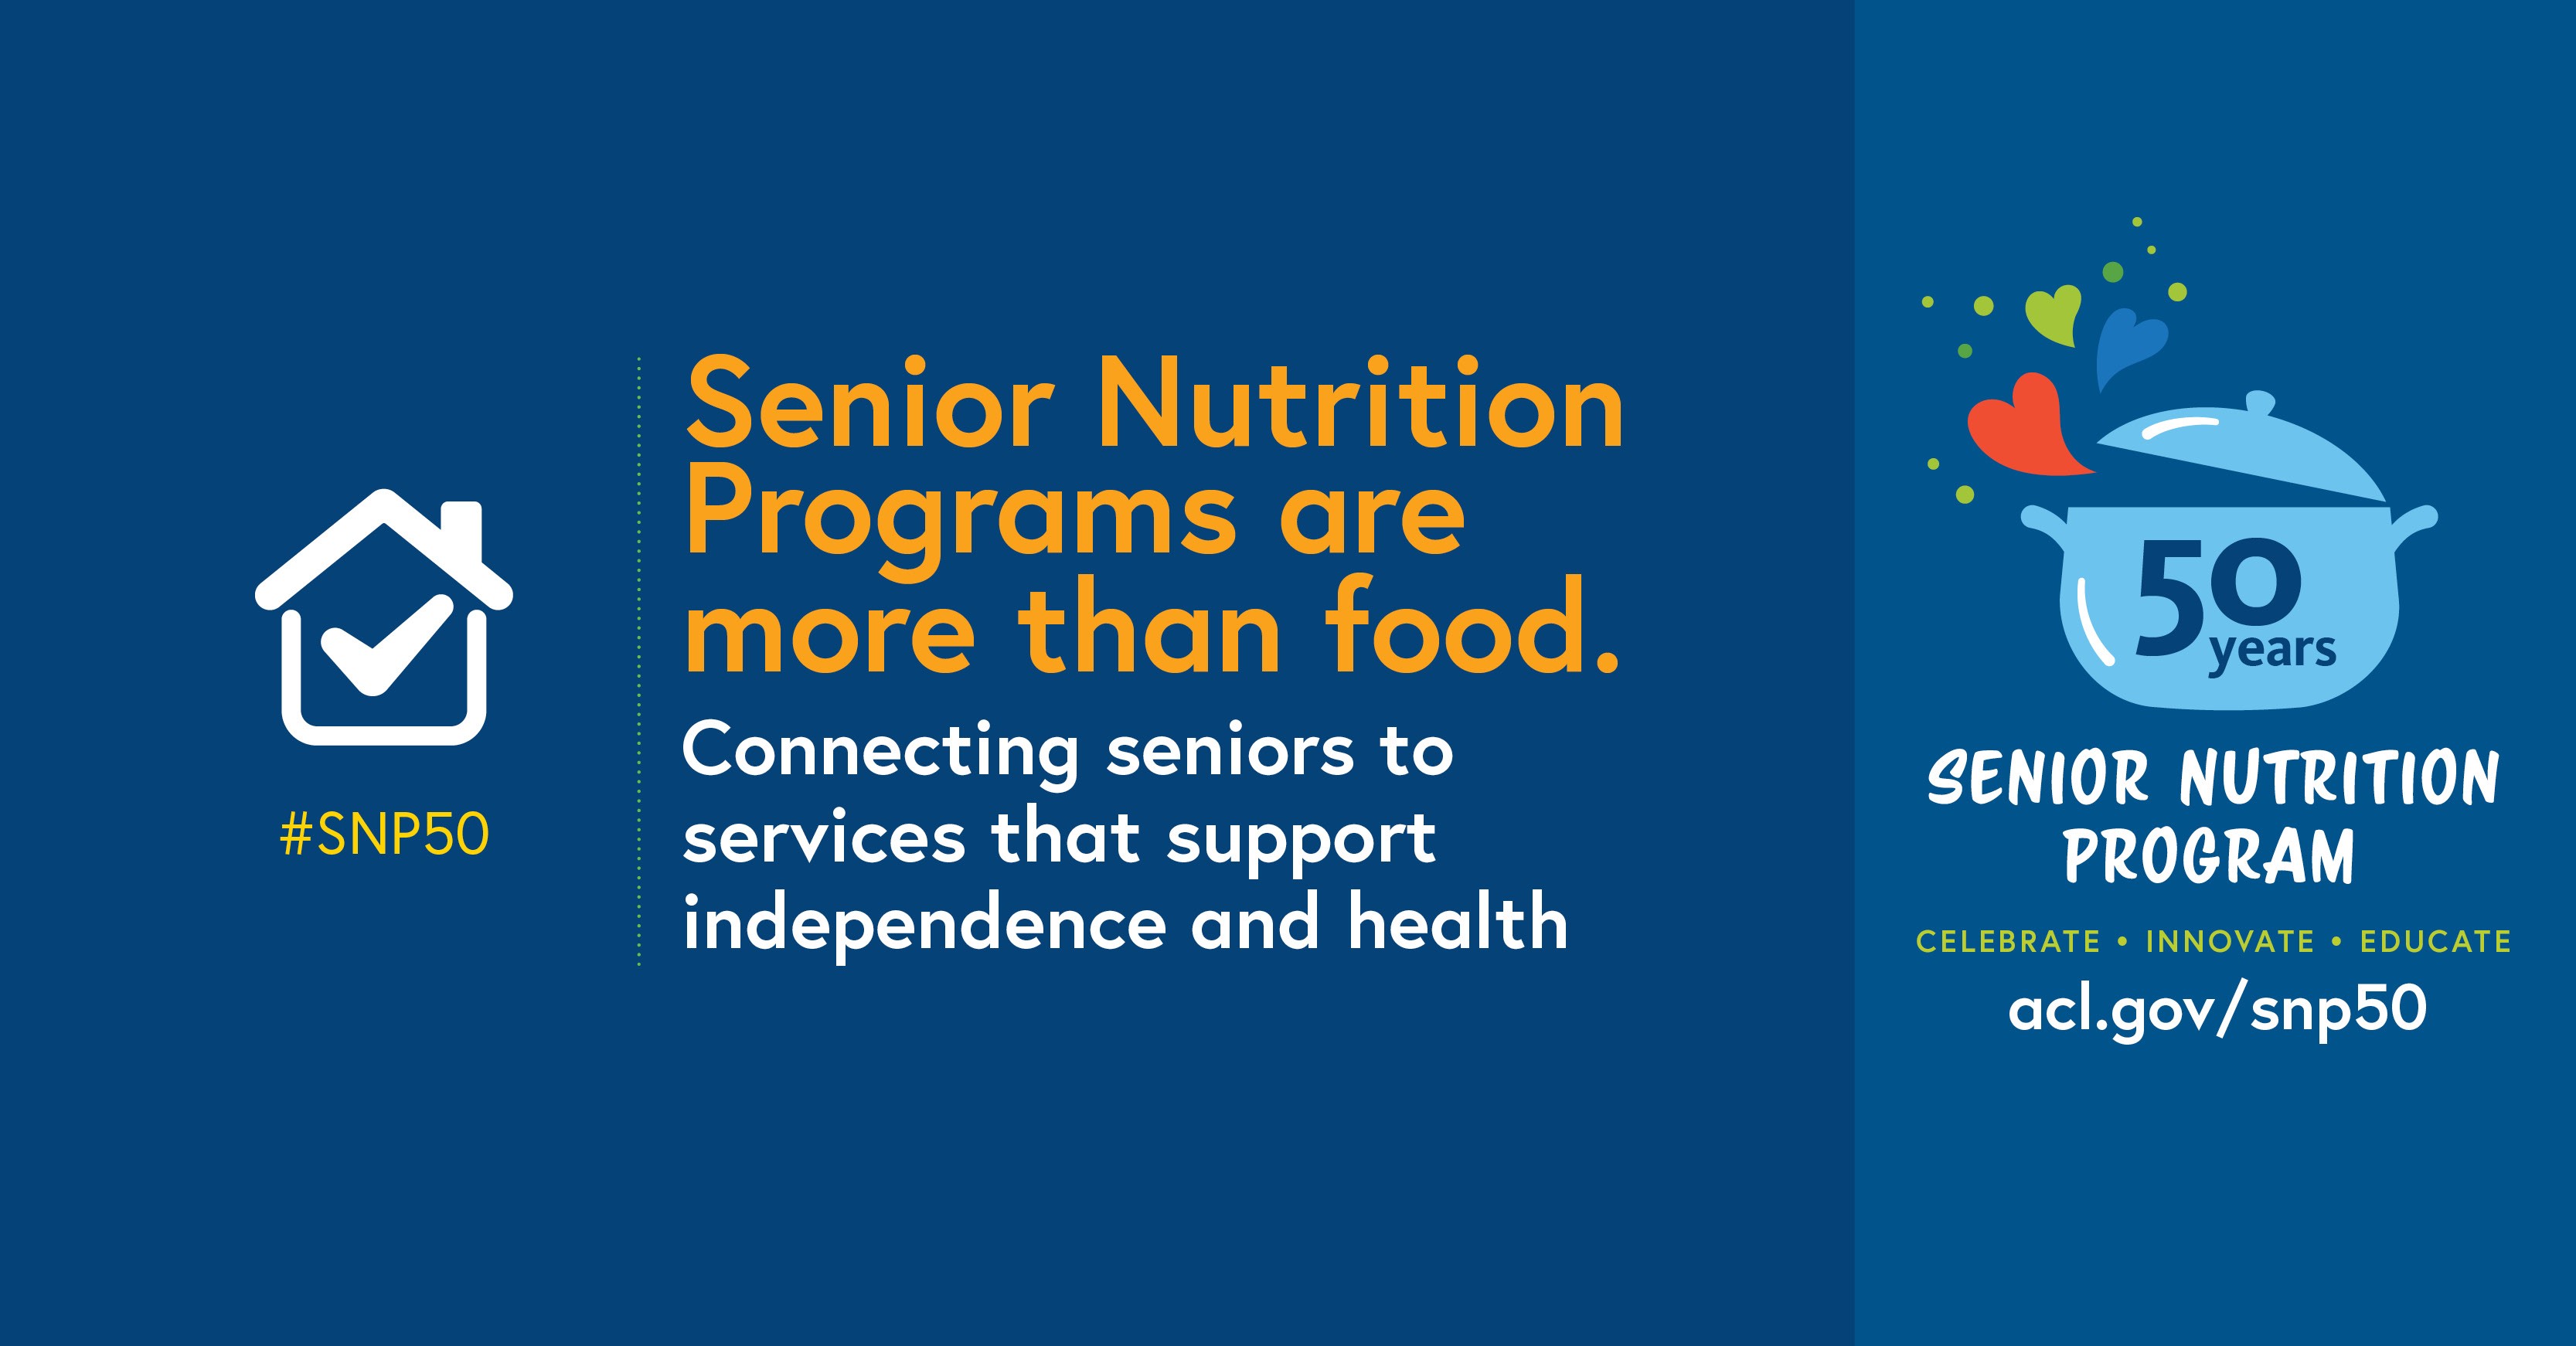 Social Graphic: Senior nutrition Programs are more than food. Connecting seniors to services that support independence and health. 50 years. Senior Nutrition Program. Celebrate. Innovate. Educate. acl.gov/snp50 #SNP50